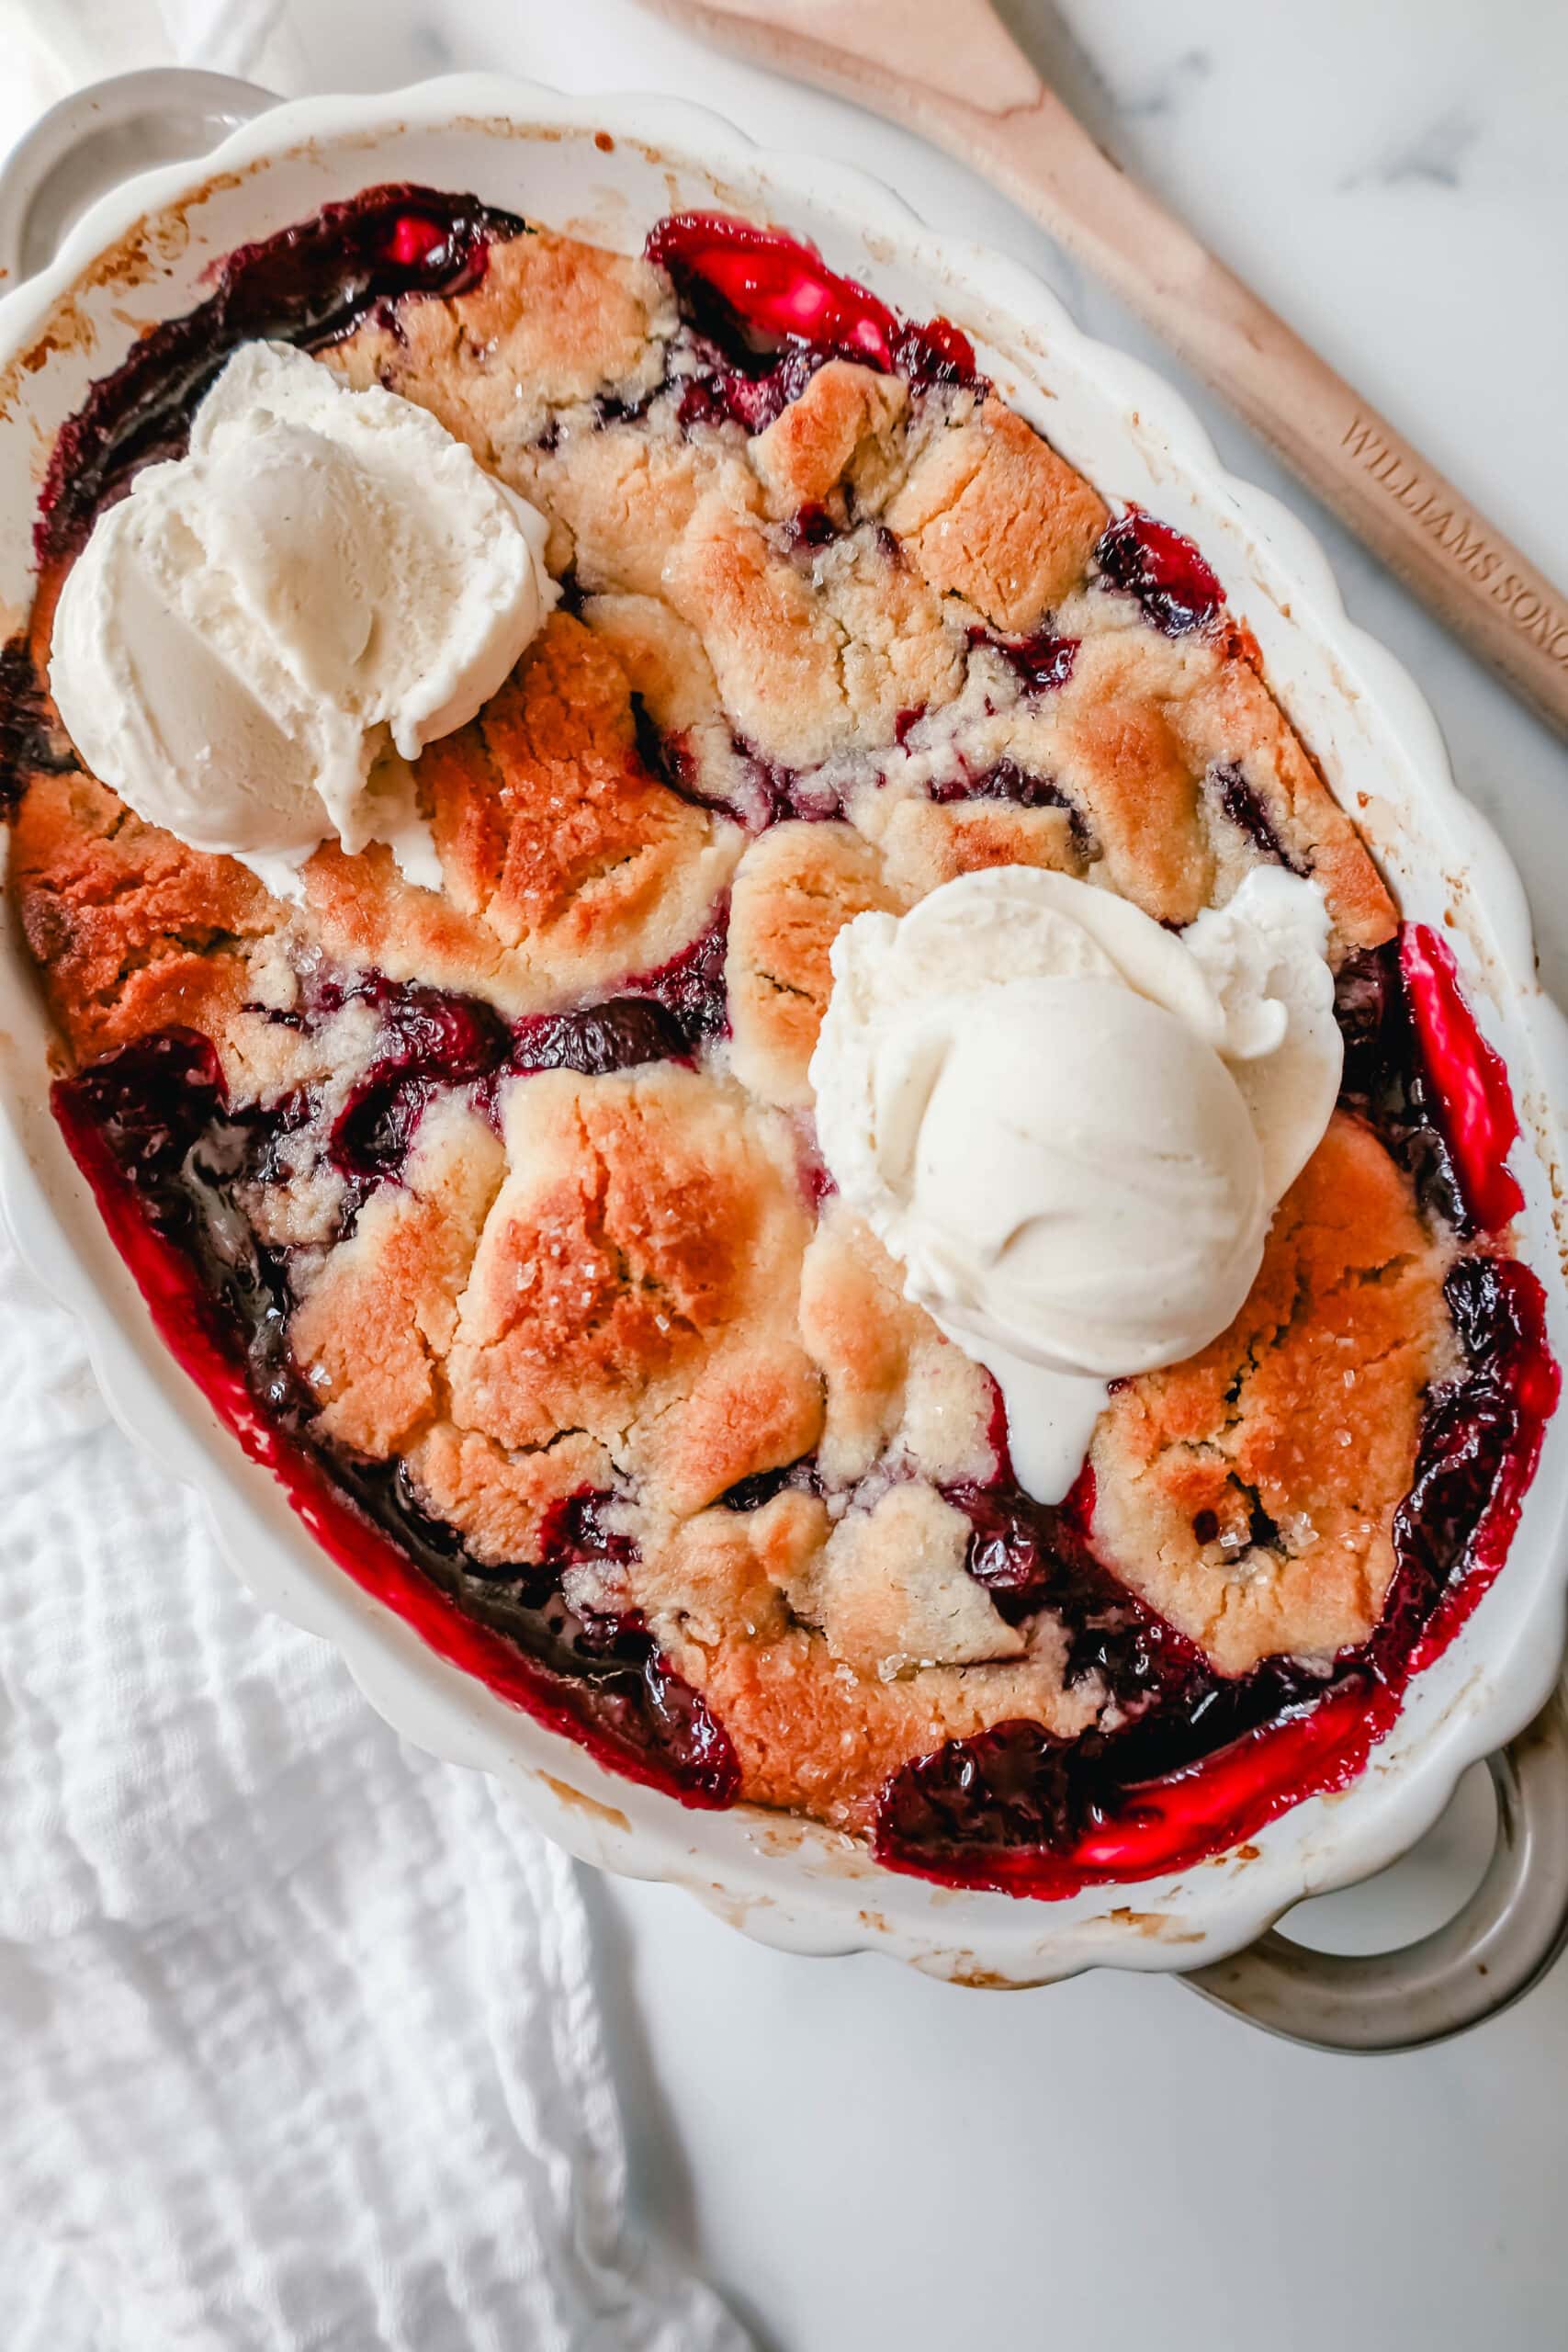 This is the Best Cherry Cobbler Recipe! This Old Fashioned Cherry Cobbler is made with fresh cherries lightly sweetened and topped with a homemade sweet and buttery cobbler crust. You are going to love this easy cherry cobbler recipe!